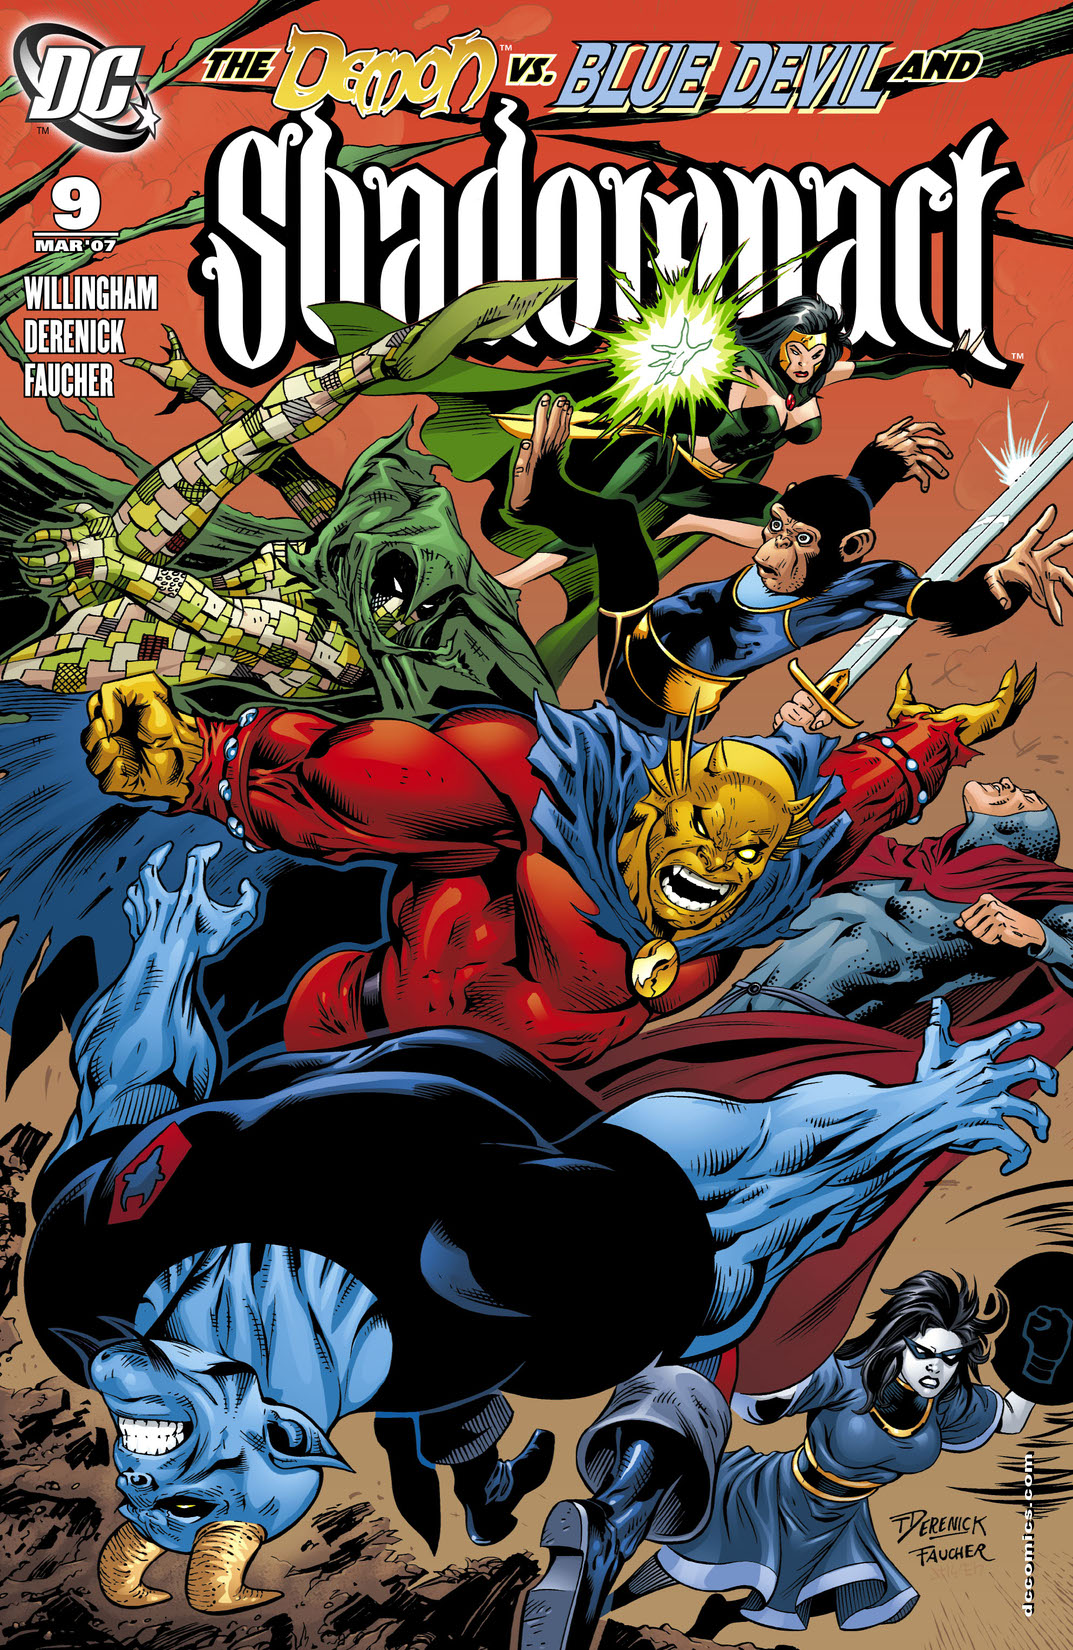 Shadowpact #9 preview images